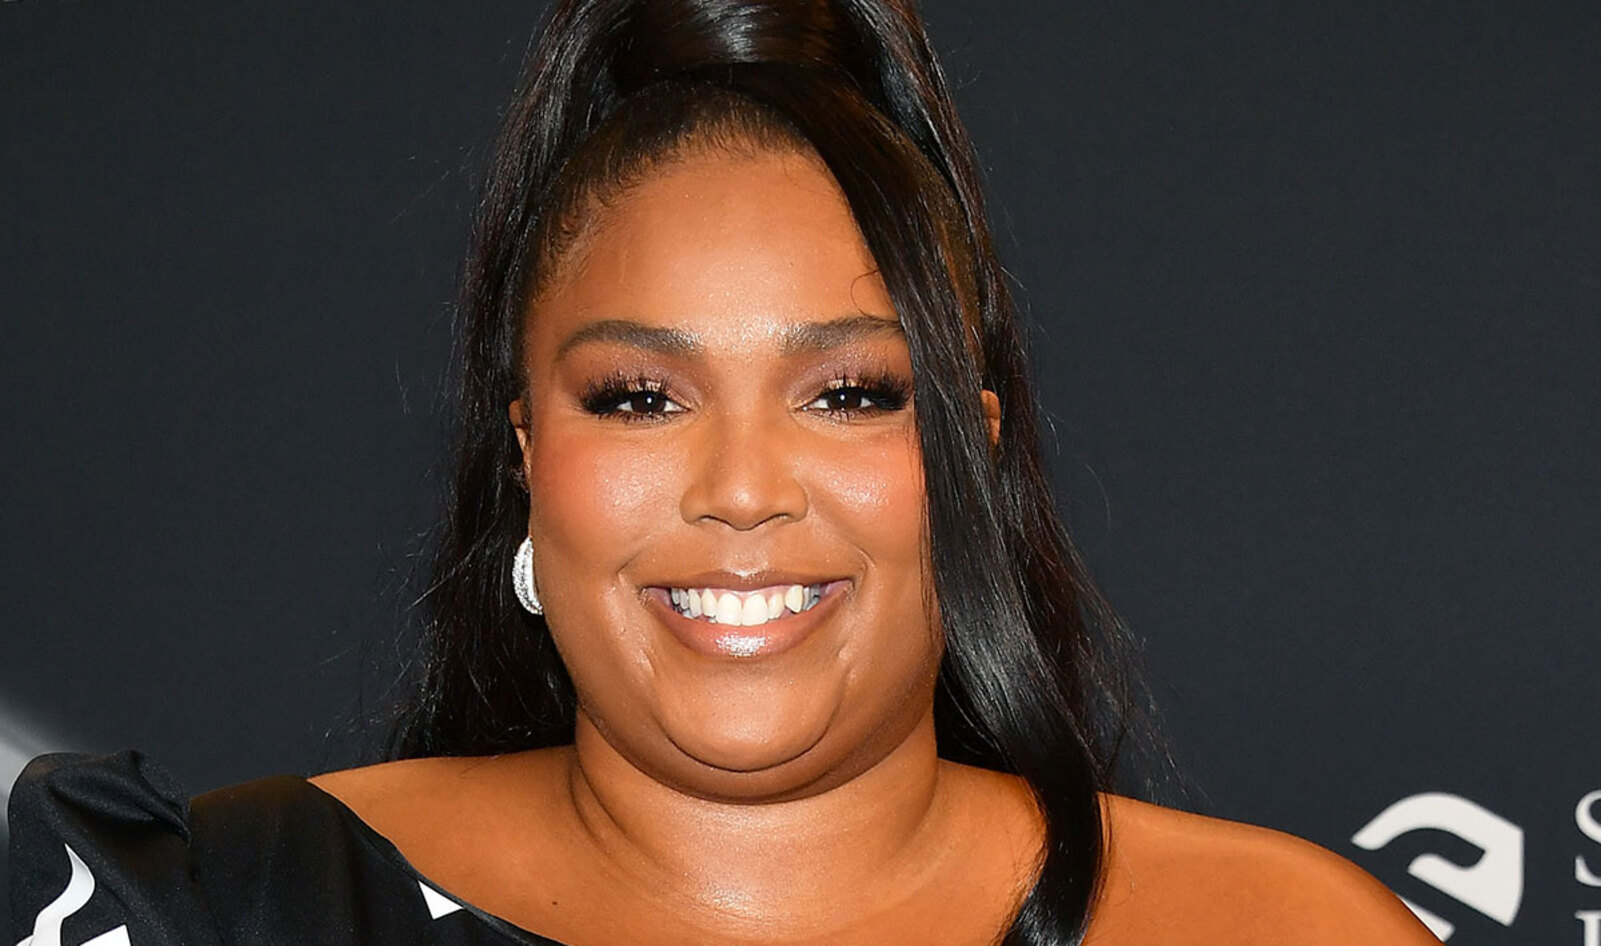 Lizzo Just Shared Her Vegan Food Diary with 12.8 Million TikTok Fans